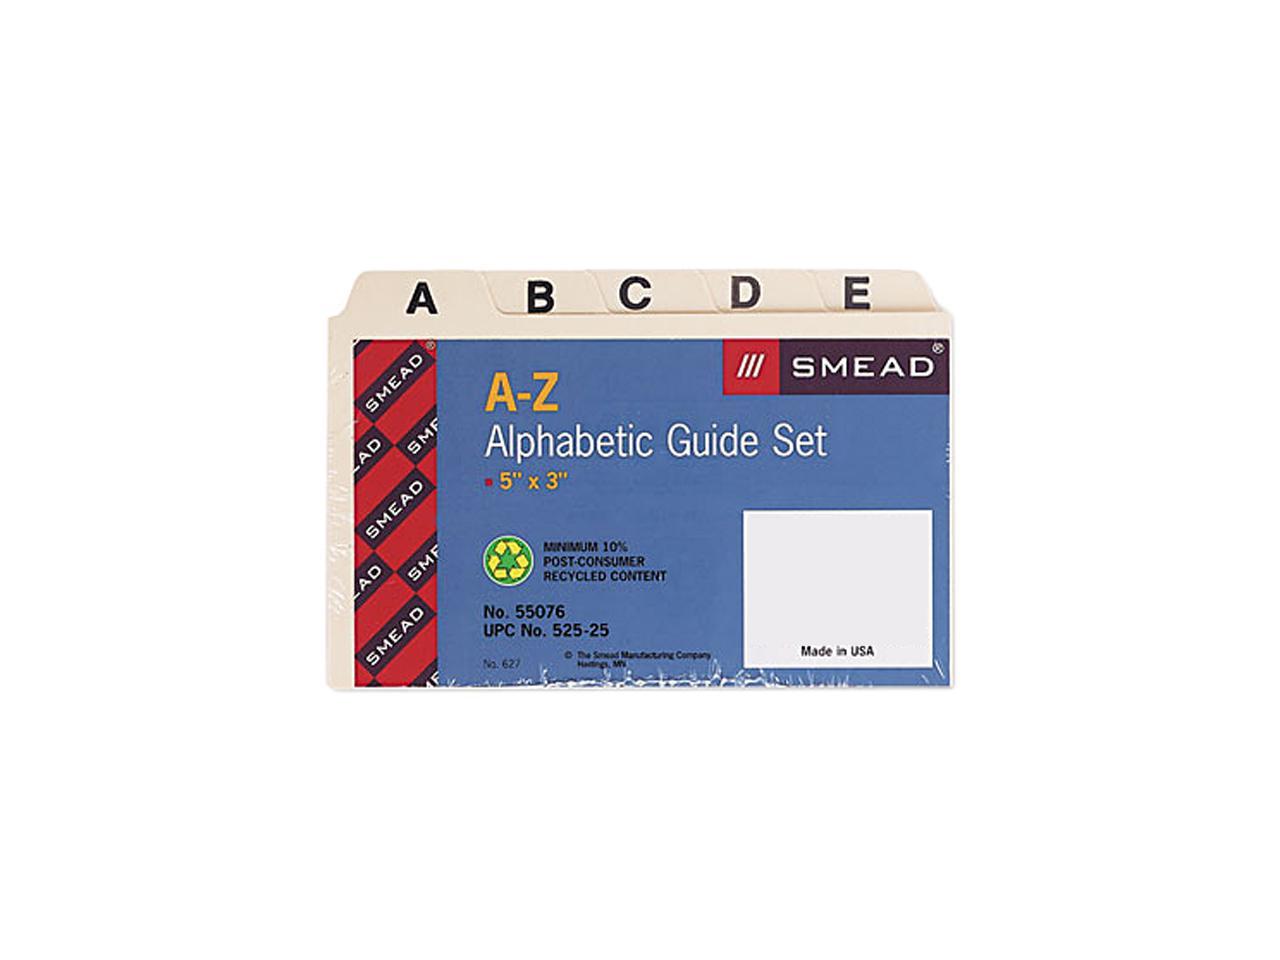 Smead Card Guides Alphabetic Sets 55076 3/"x5/"  525-25  New in Sealed Package